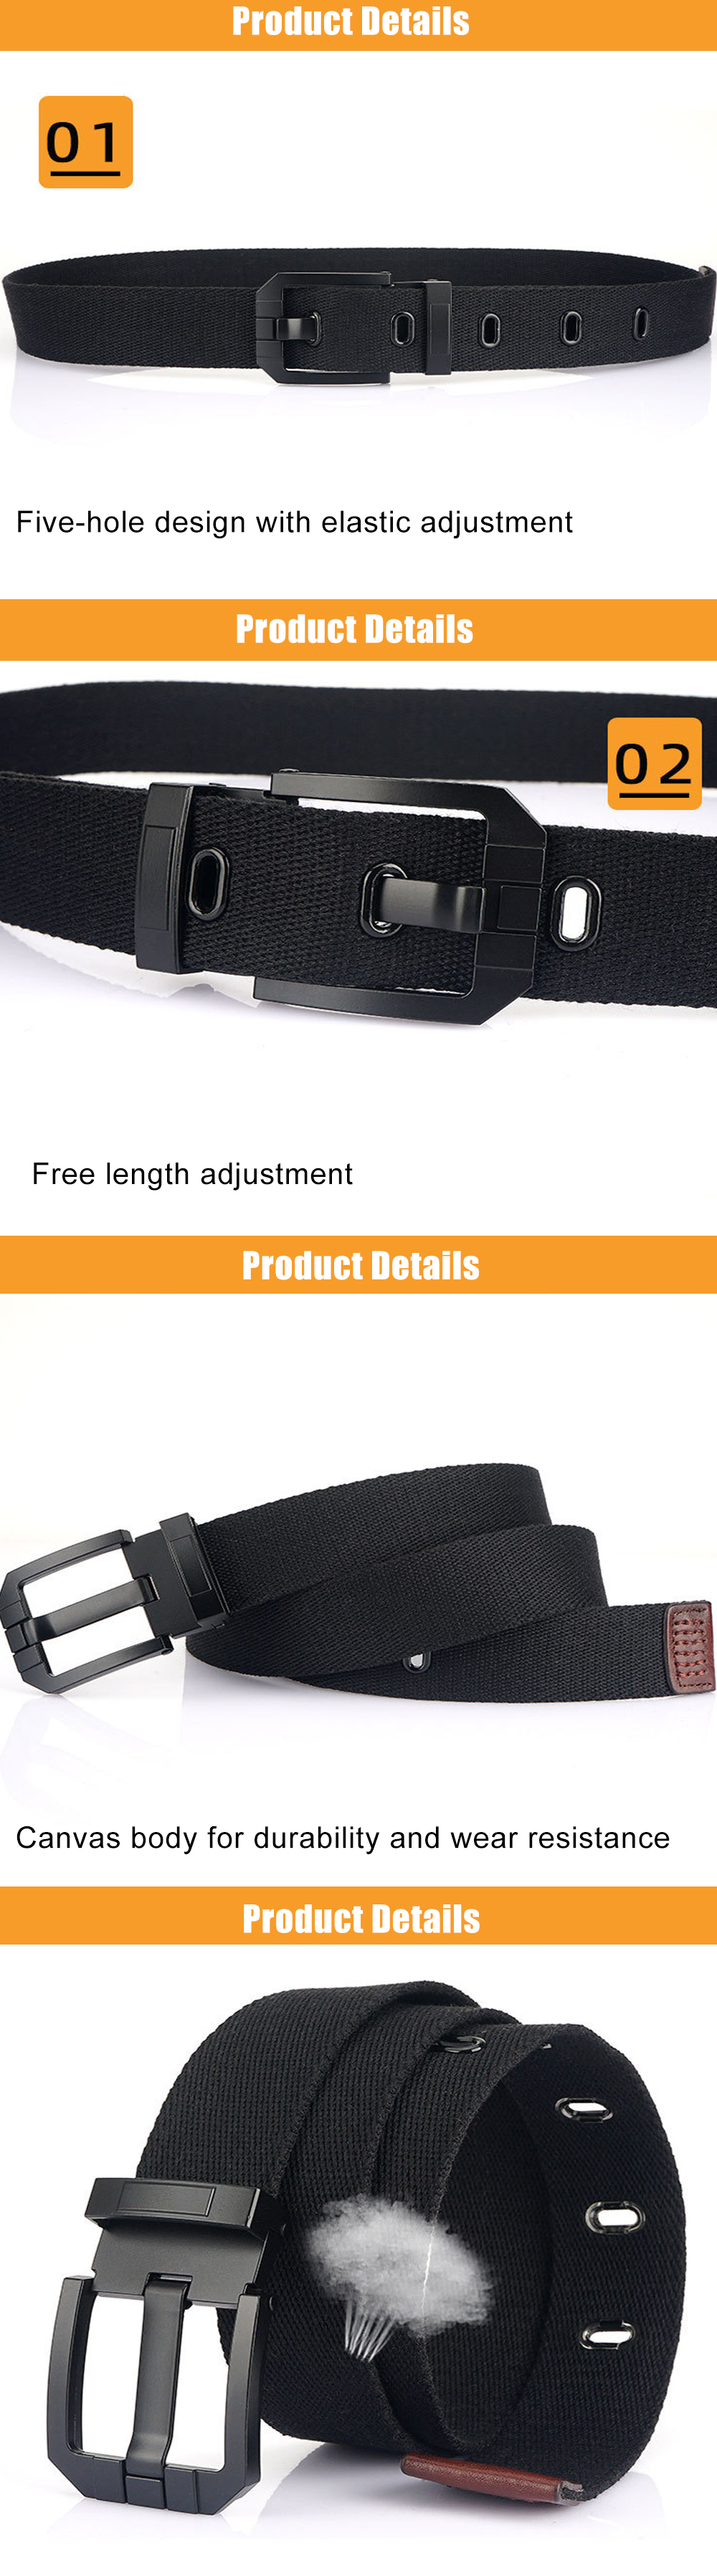 AWMN-Tactical-Canvas-Belt-Adjustable-Length-Breathable-and-Hardwearing-Outdoor-Mens-Casual-Belt-1875785-2